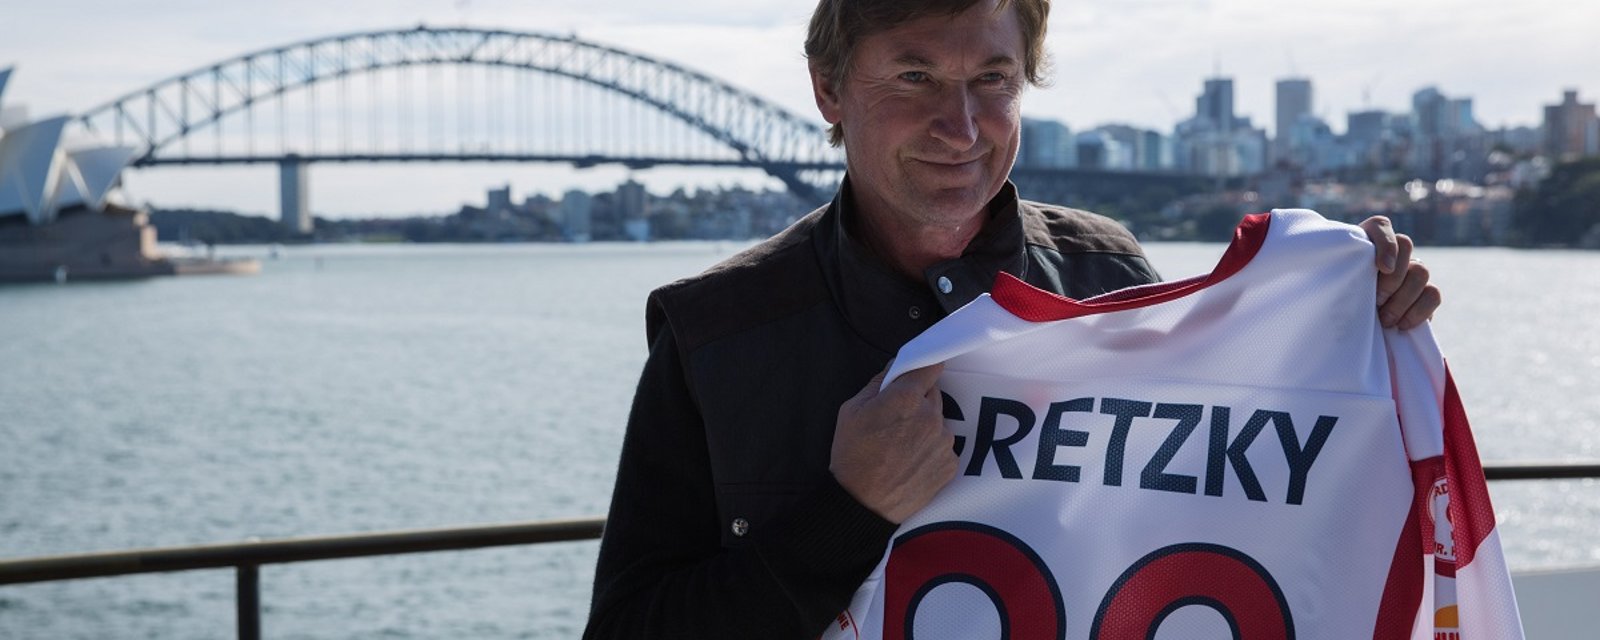 Breaking: Major rumors of Wayne Gretzky taking on a new role with an NHL team.